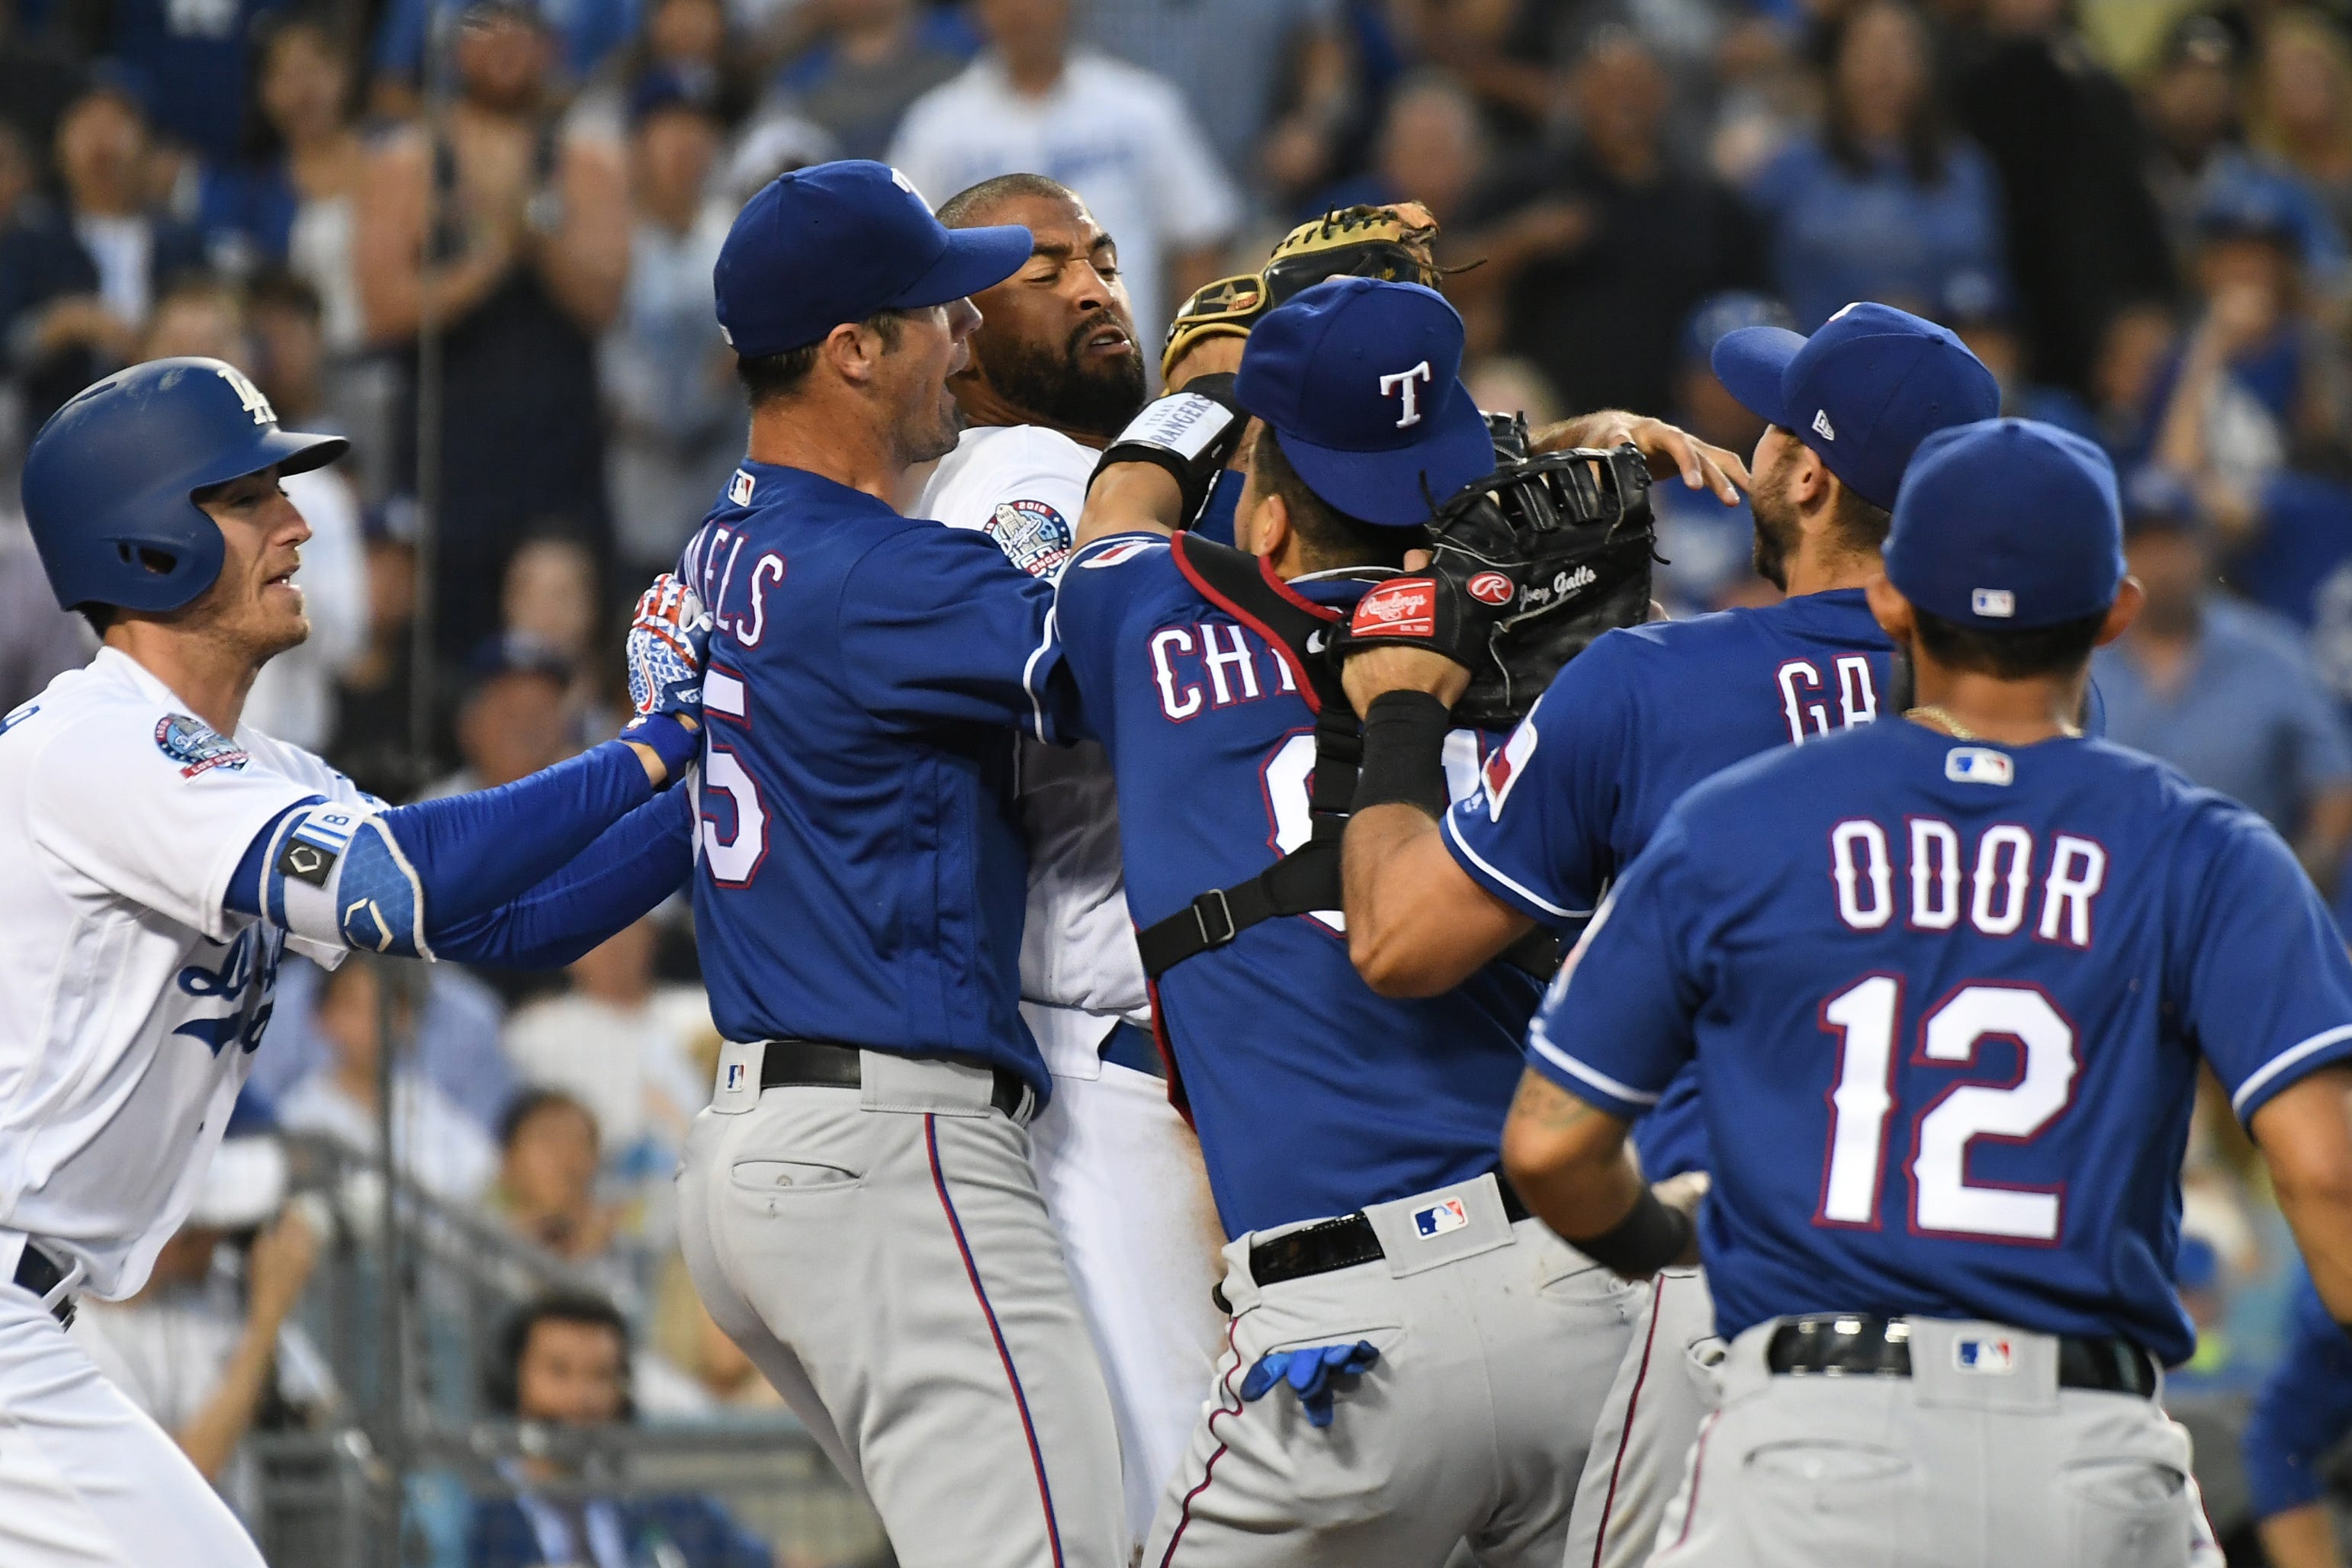 Benches clear after Dodgers&apos; Matt Kemp takes out Rangers catcher Robinson Chirinos